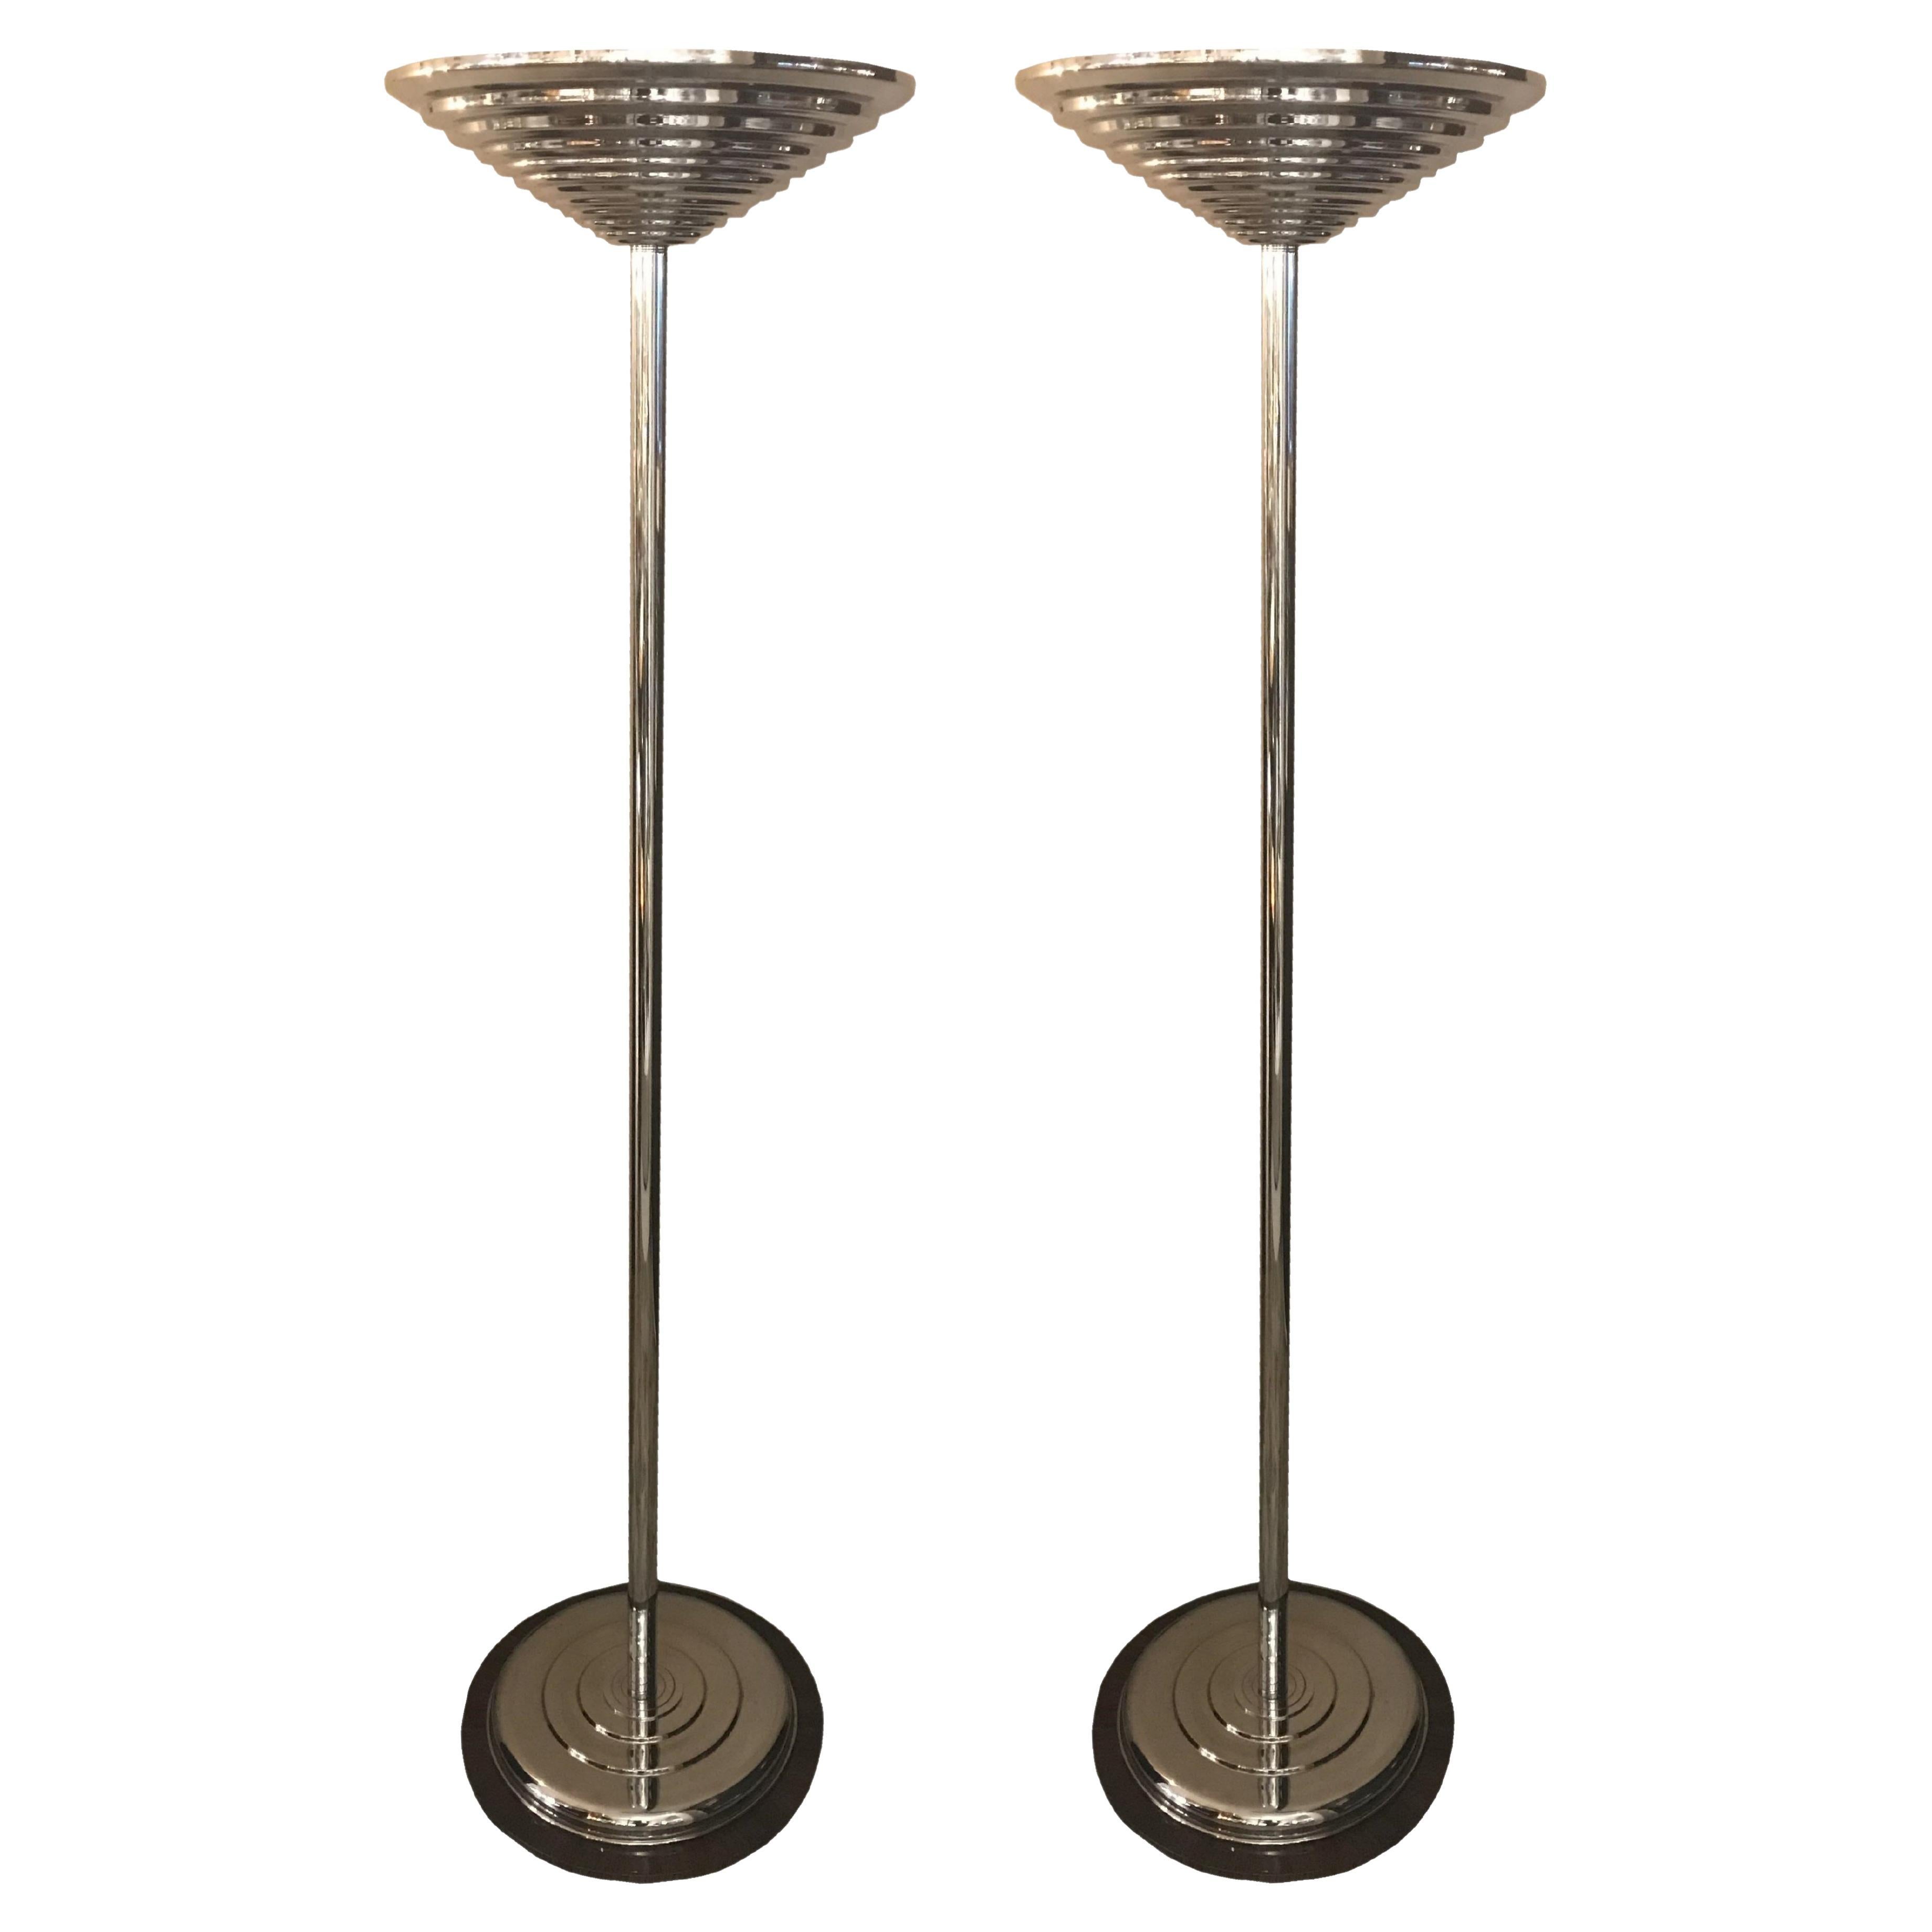 Pair of Art Deco Floor Lamps, France, Glass, Wood and Chrome, 1930